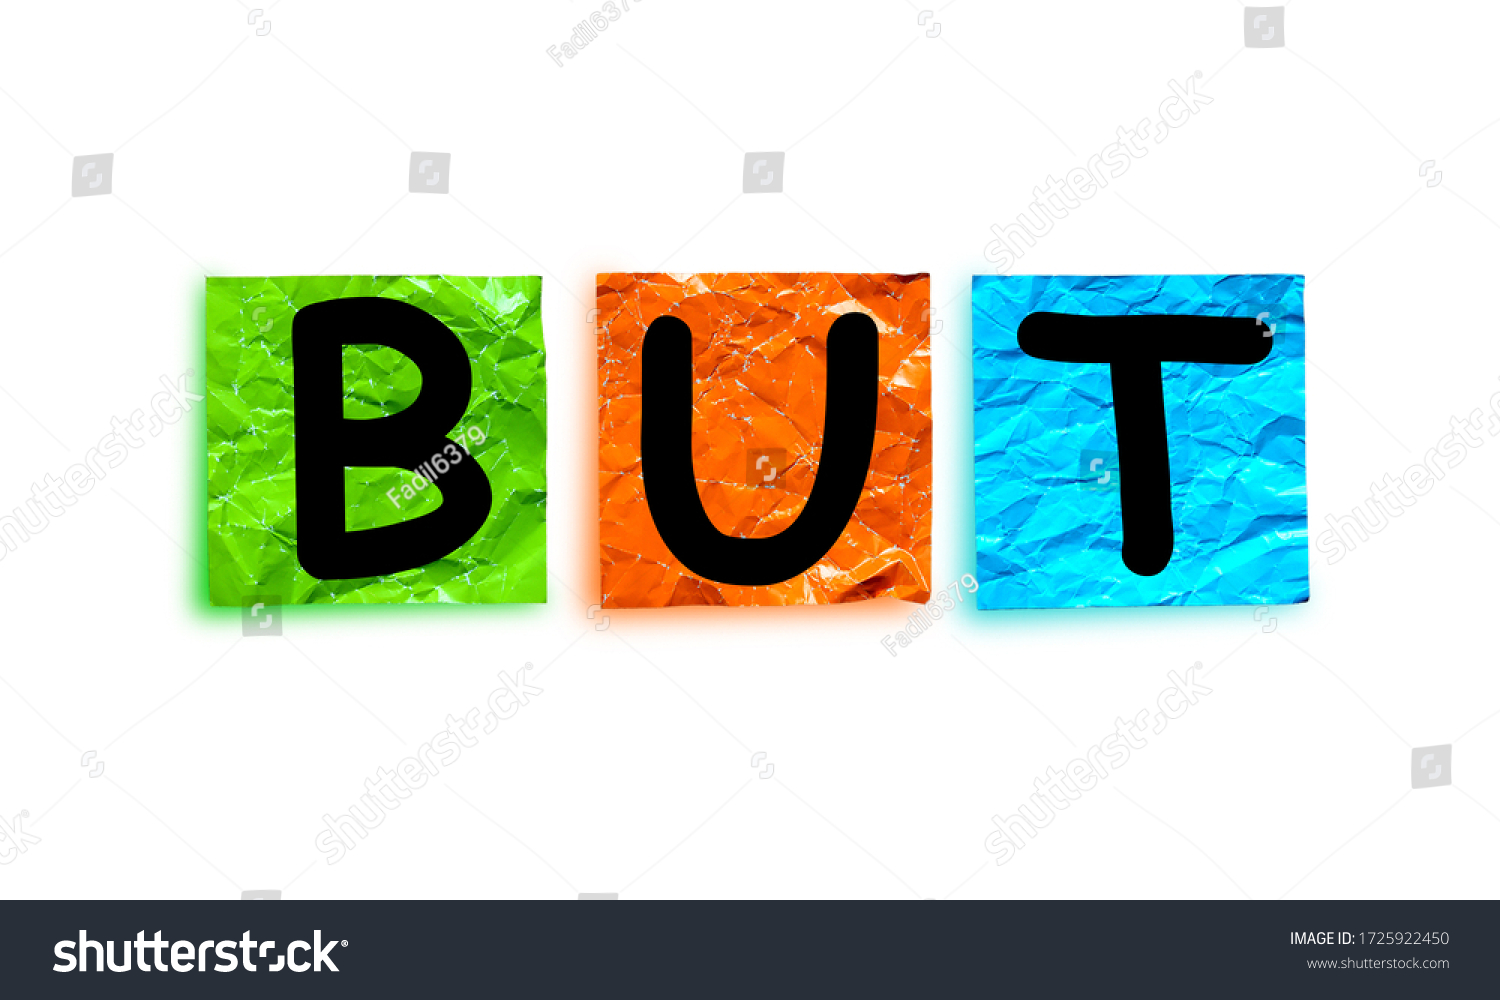 words-written-on-colored-paper-that-stock-illustration-1725922450